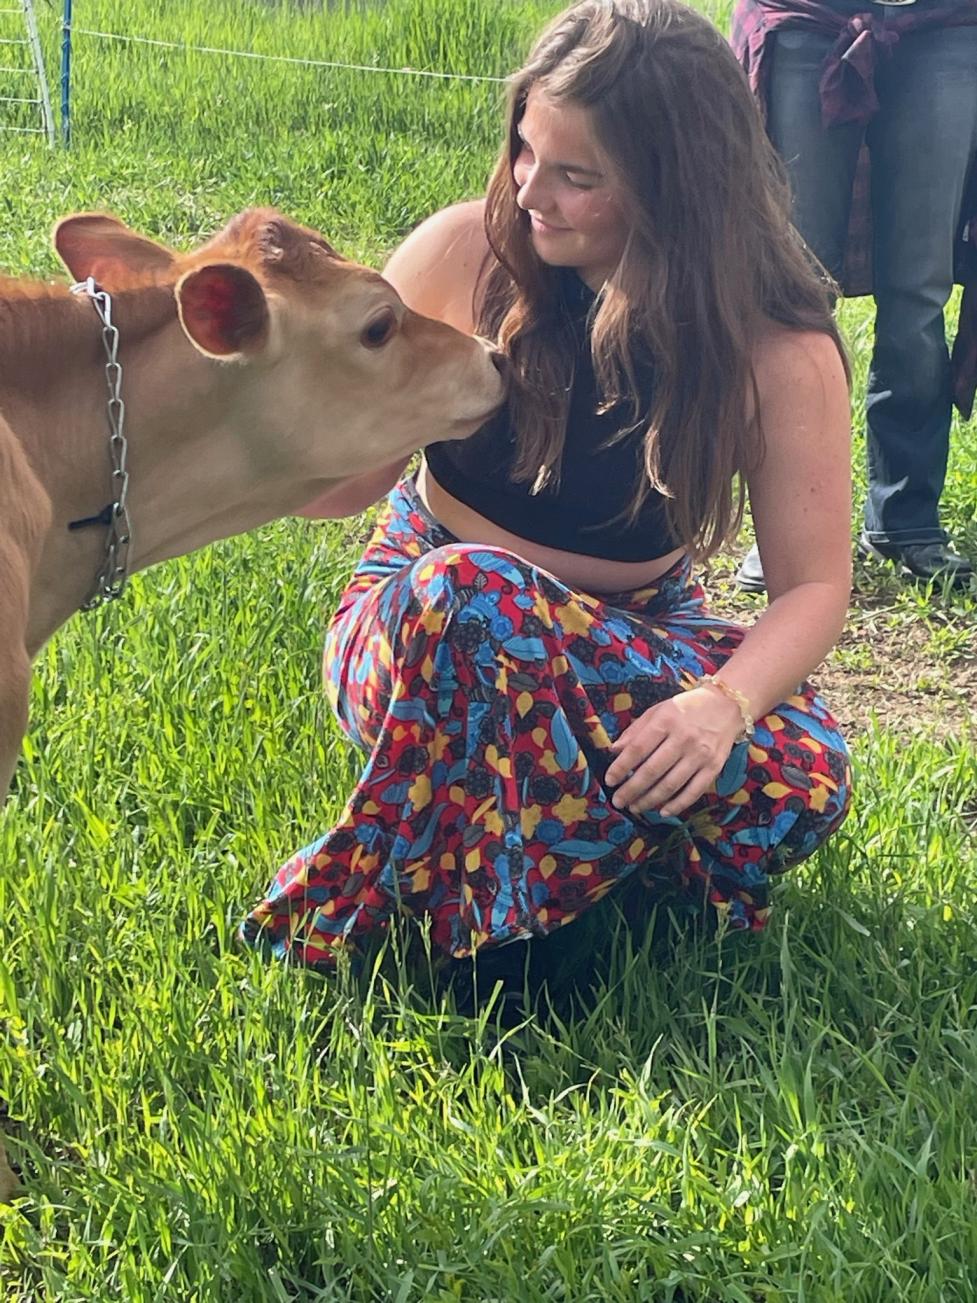 A woman petting a small, light brown cow